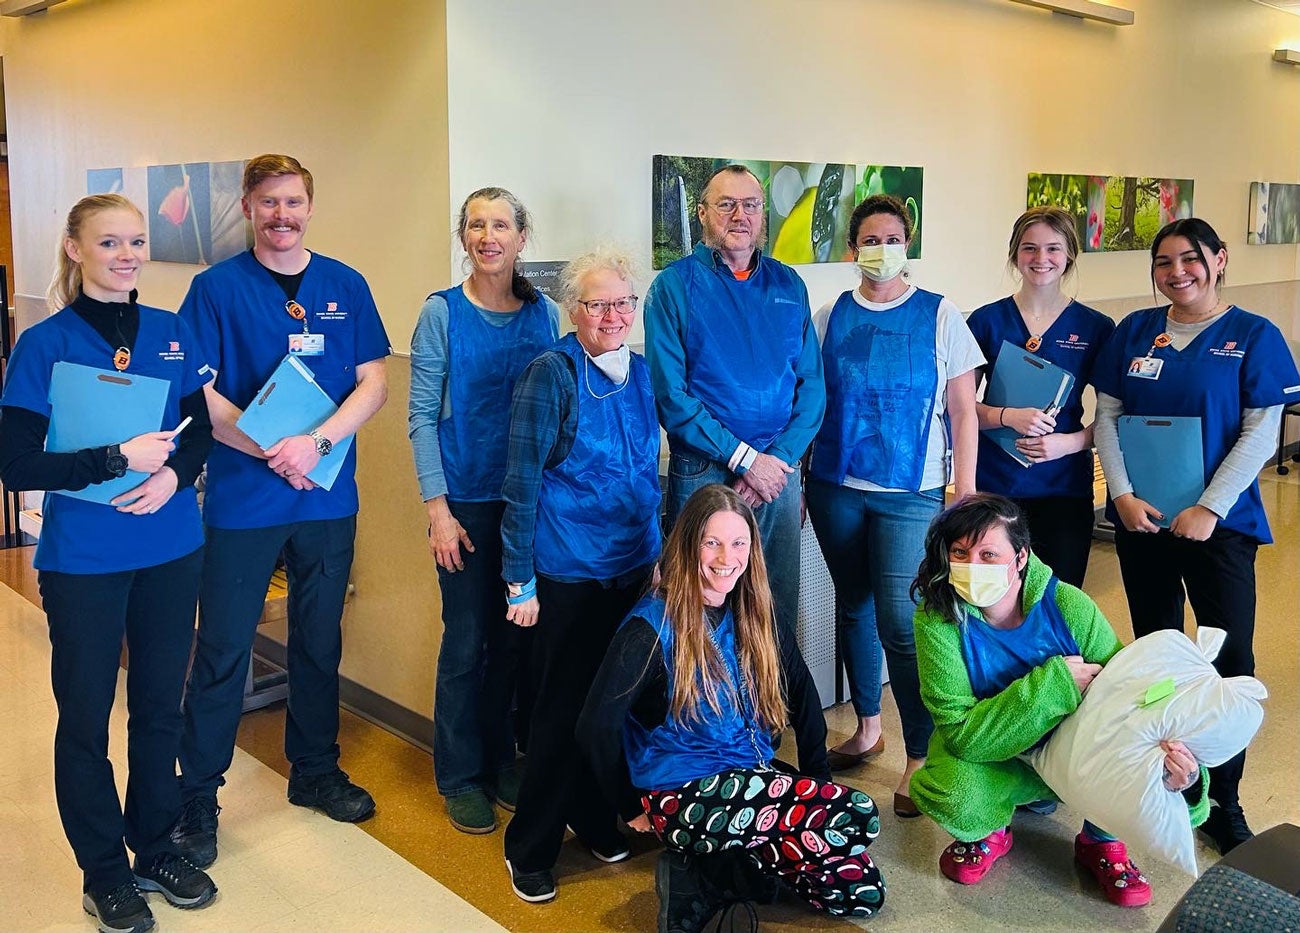 Nursing students in scrubs stand with standardized patients who portray patients in a behavioral health setting, distinguished by blue pinnies.